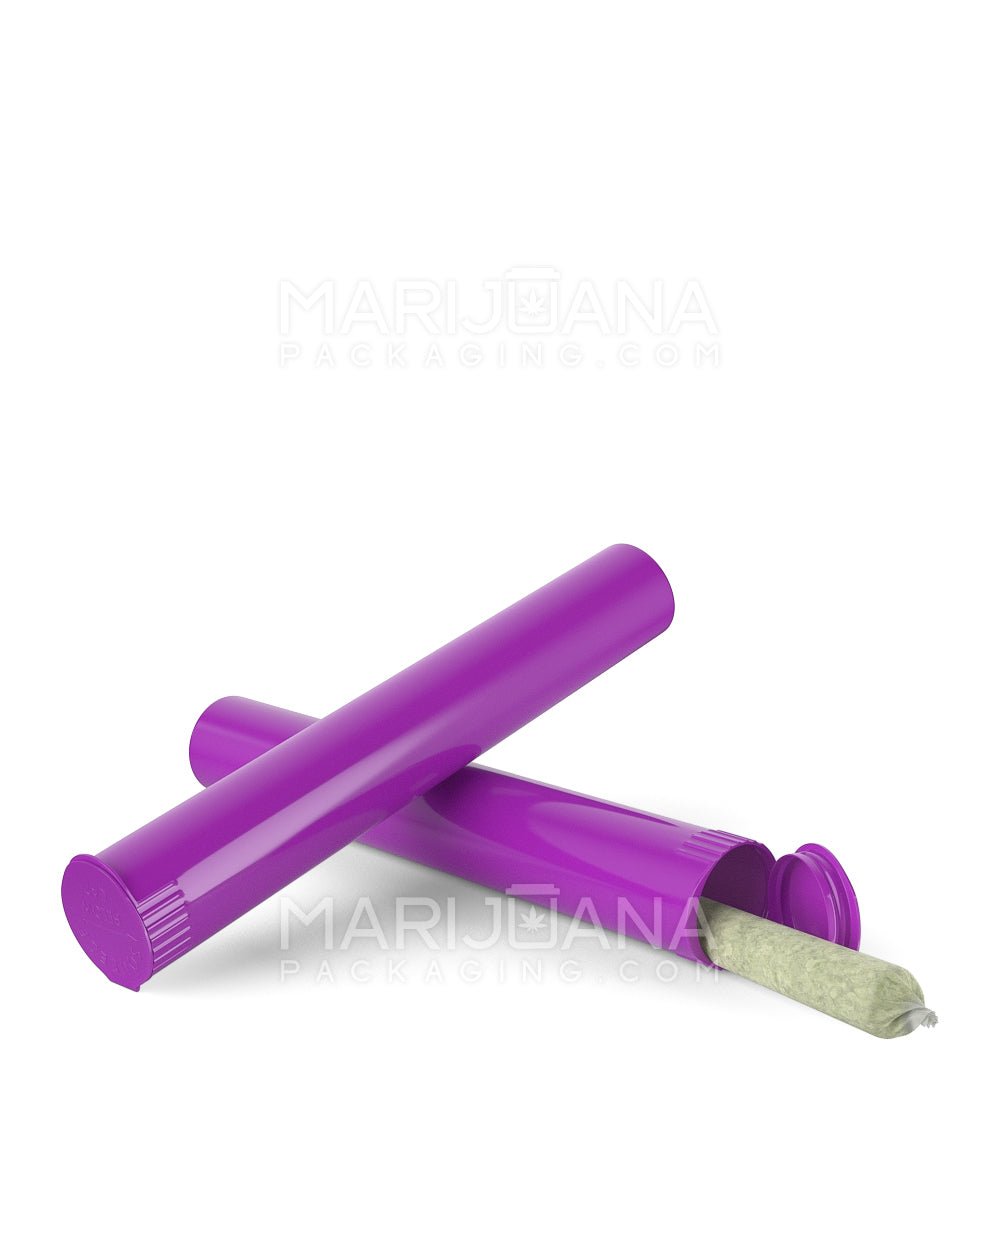 Child Resistant | King Size Pop Top Opaque Plastic Pre-Roll Tubes | 116mm - Purple - 1000 Count - 8